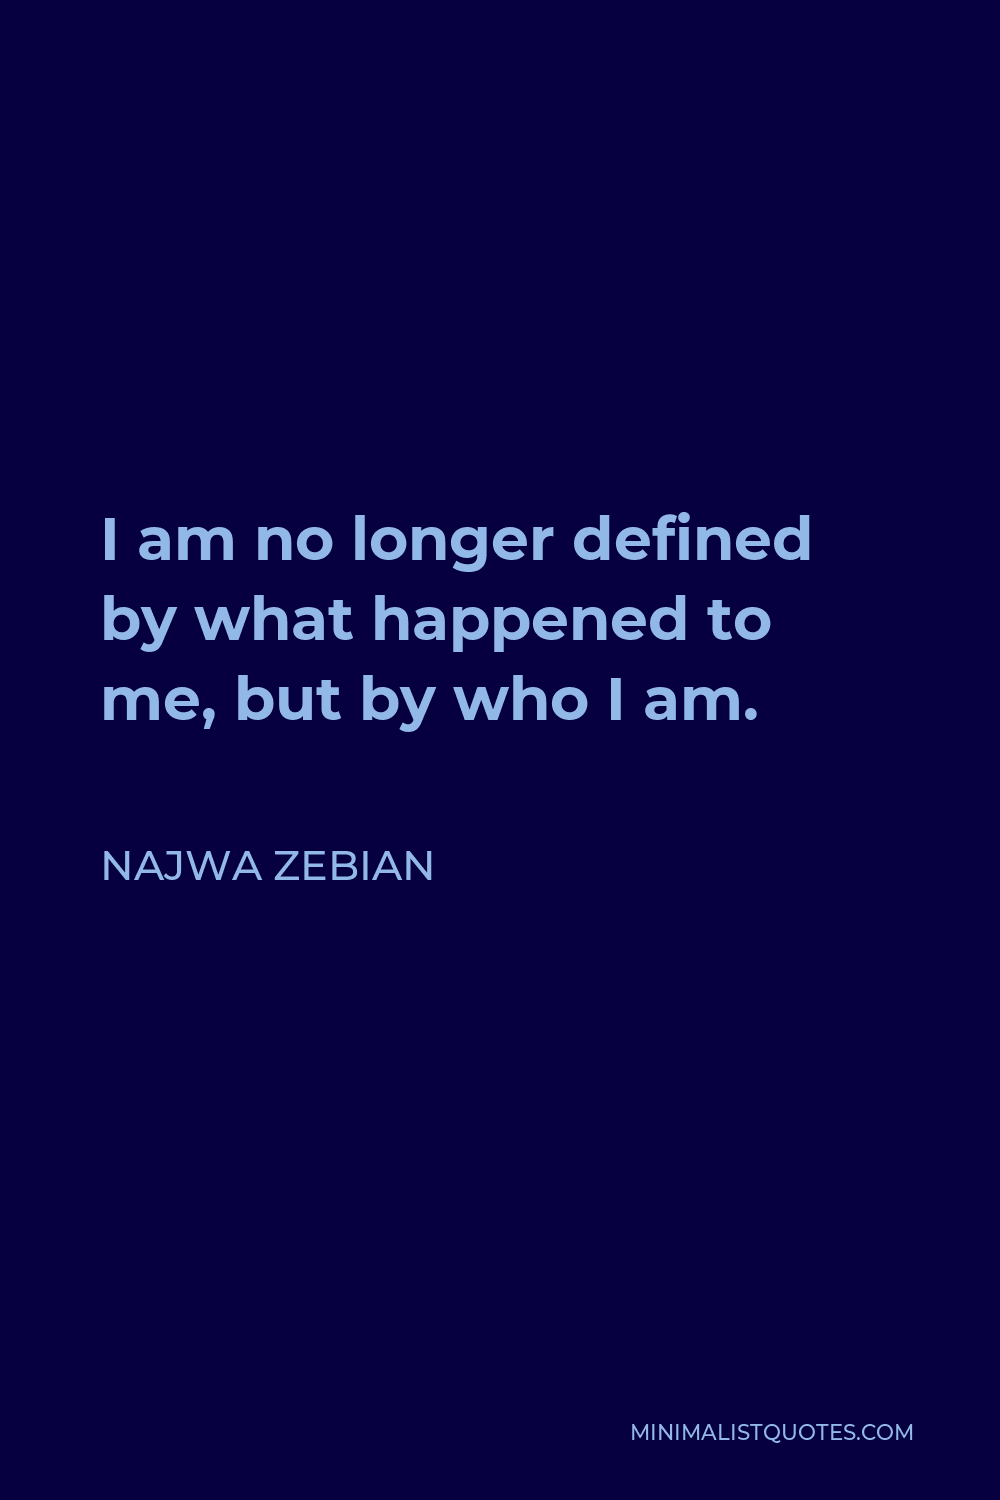 Najwa Zebian Quote - I am no longer defined by what happened to me, but by who I am.